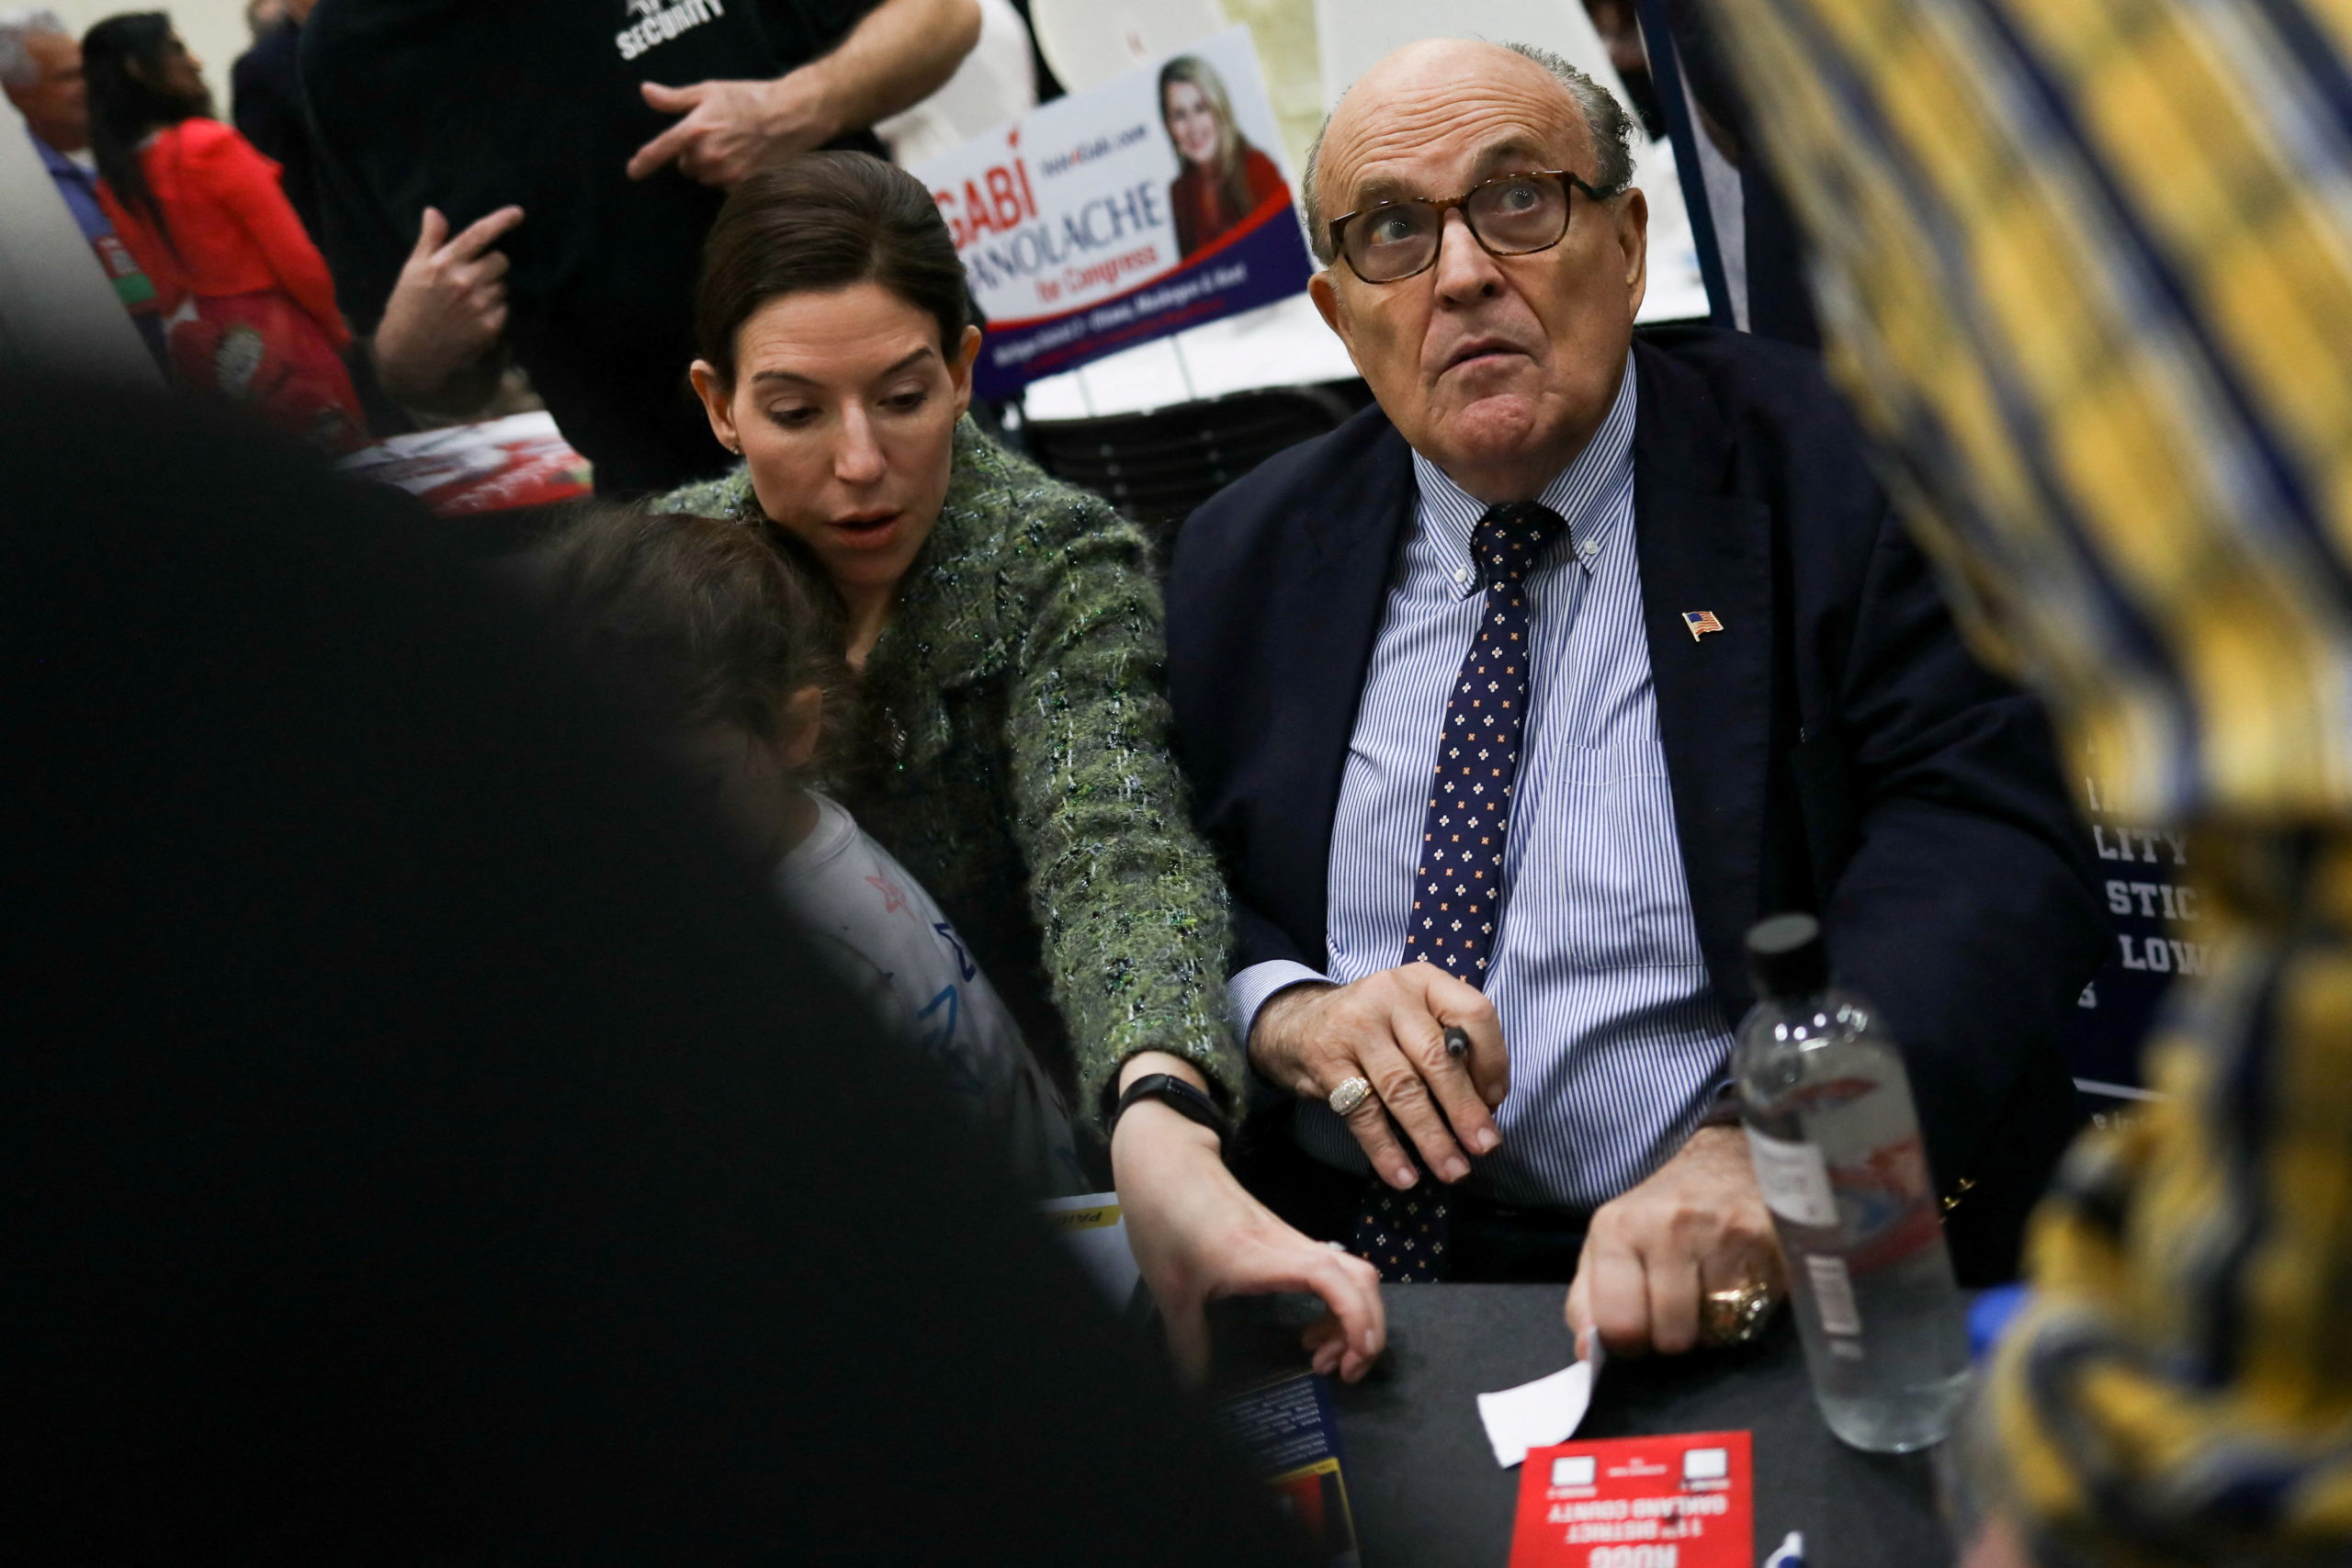 Former New York City mayor and lawyer for former President Donald Trump Rudy Giuliani greets fans as people gather for the "Empowering Michigan 2022" Michigan GOP members convention at DeVos Place in Grand Rapids, Michigan, U.S., April 23, 2022. REUTERS/Emily Elconin